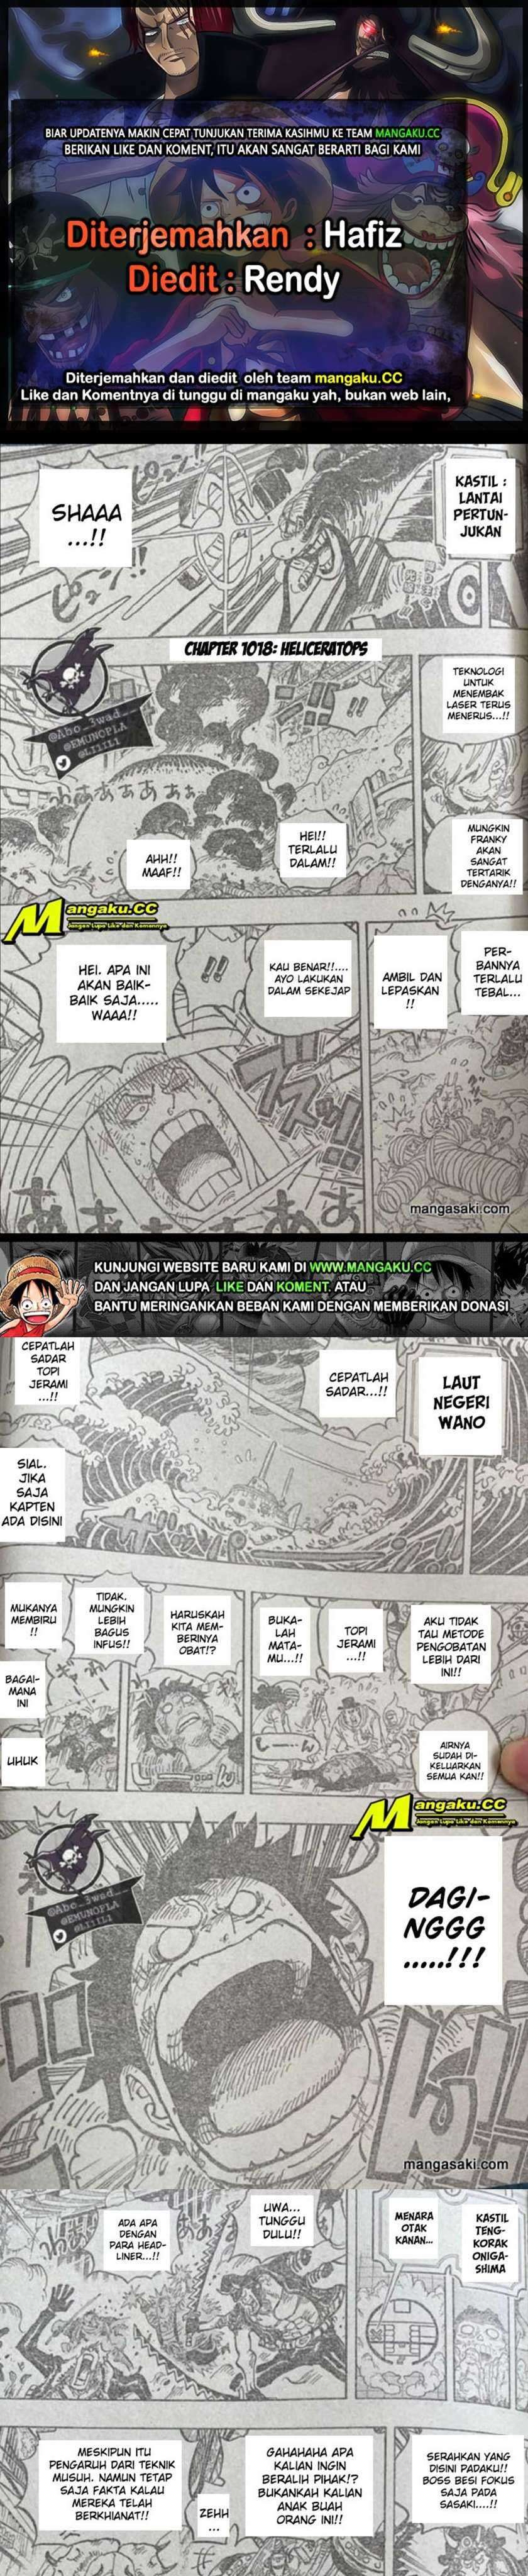 One Piece Chapter 1019 lq Image 0